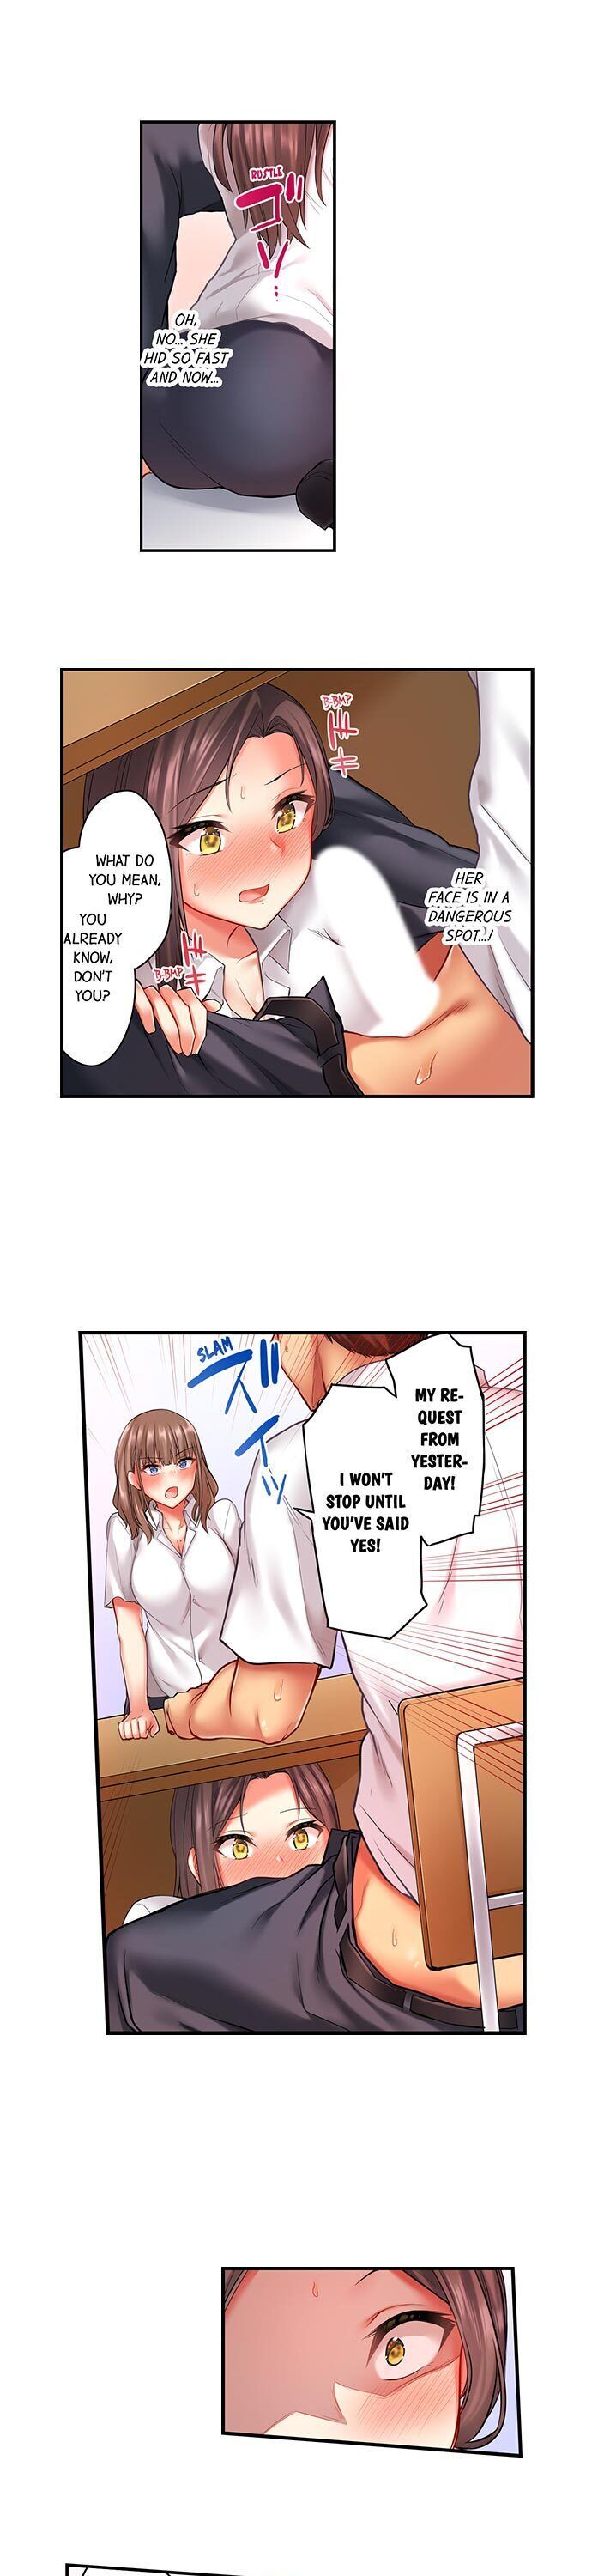 If I See Your Boobs, There’s No Way I Won’t Lick Them… - Chapter 14 Page 2